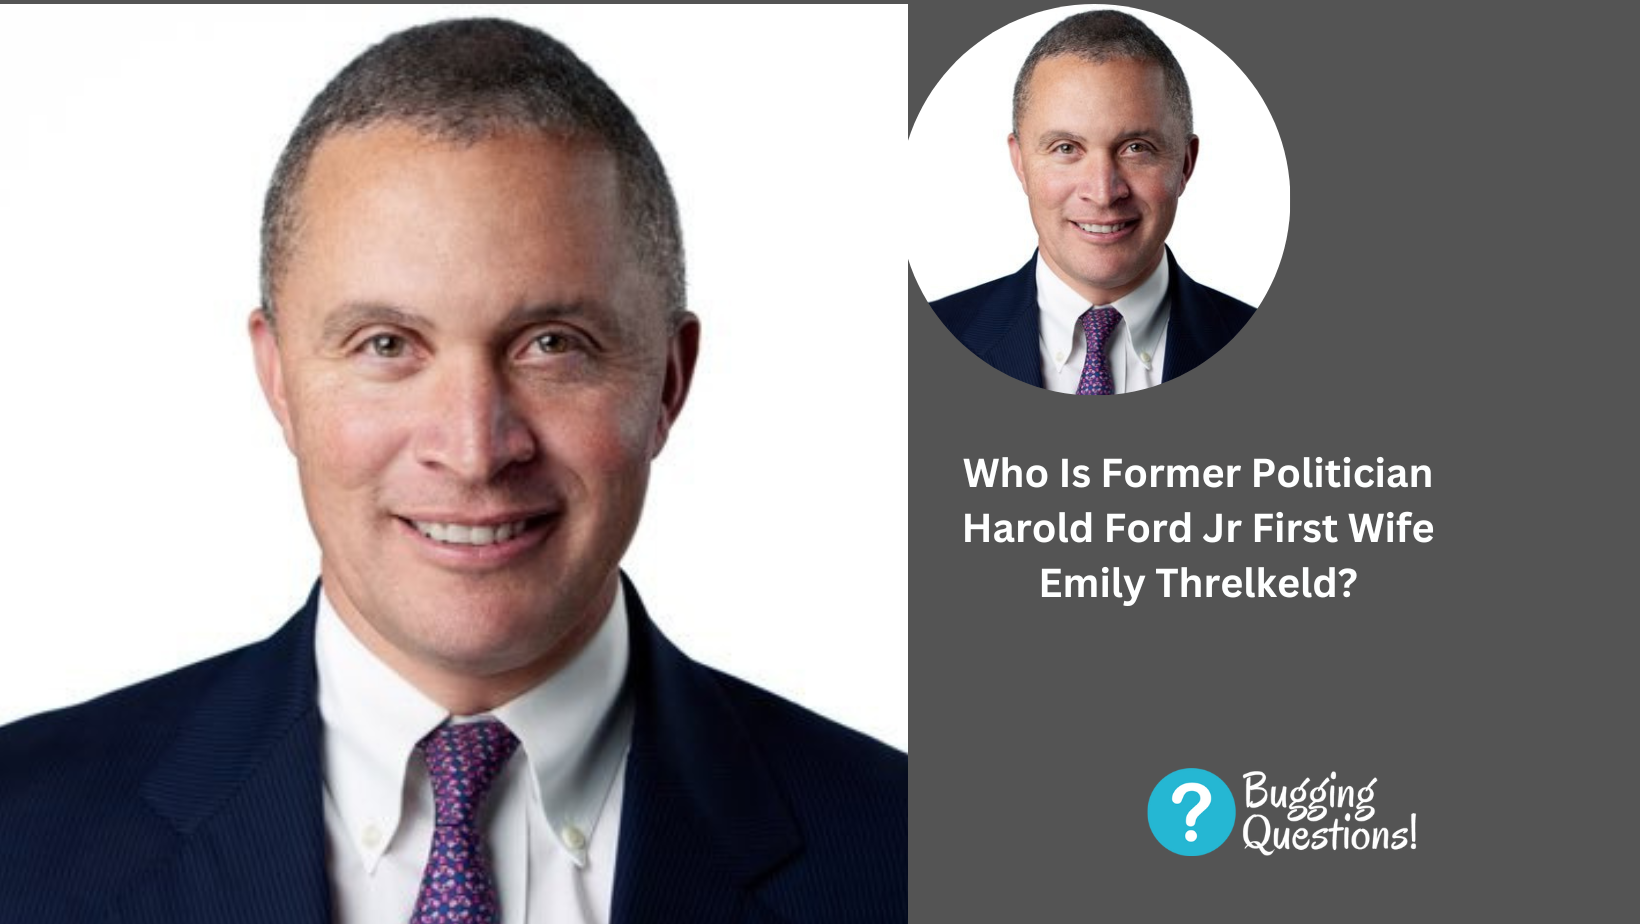 Who Is Former Politician Harold Ford Jr First Wife Emily Threlkeld?